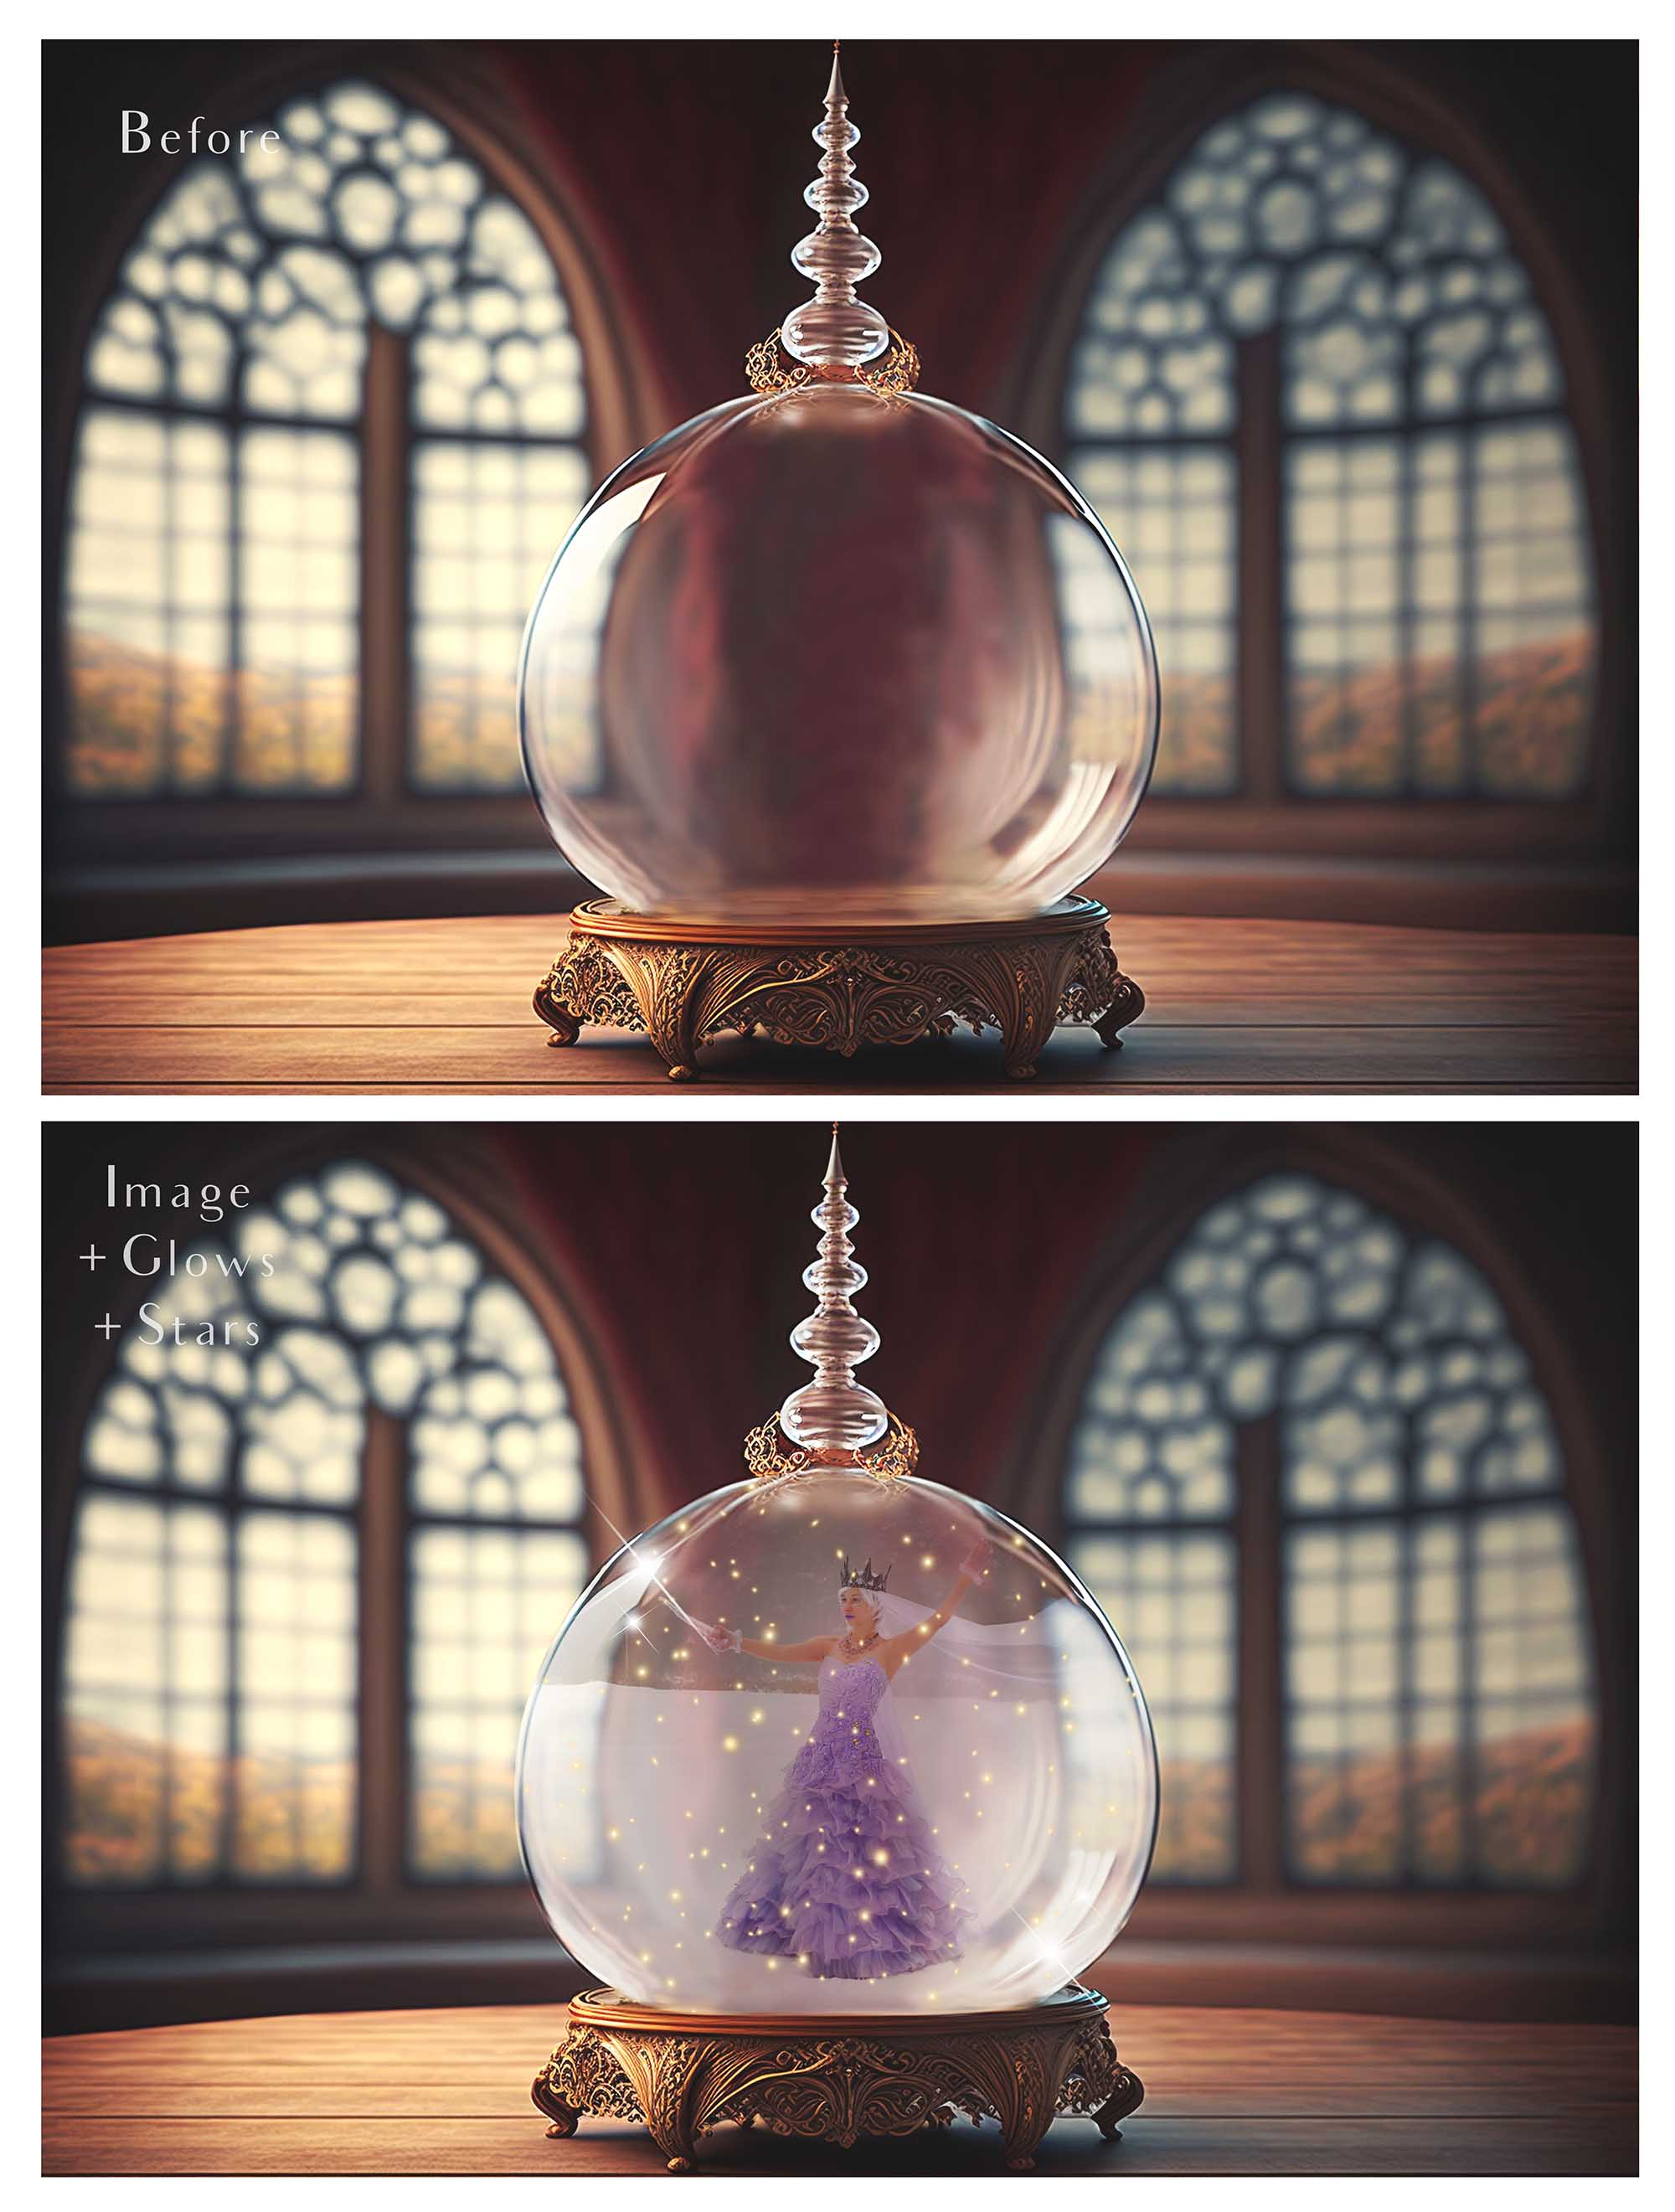 Digital Background with Snow Globe, snow flurries and a PSD Template included in the set.The globe is transparent, perfect for you to add your own images and retain the snow globe effect. This file is 6000 x 4000, 300dpi. High resolution. This is a DIGITAL product. Includes png overlay with the snow globe effect added.